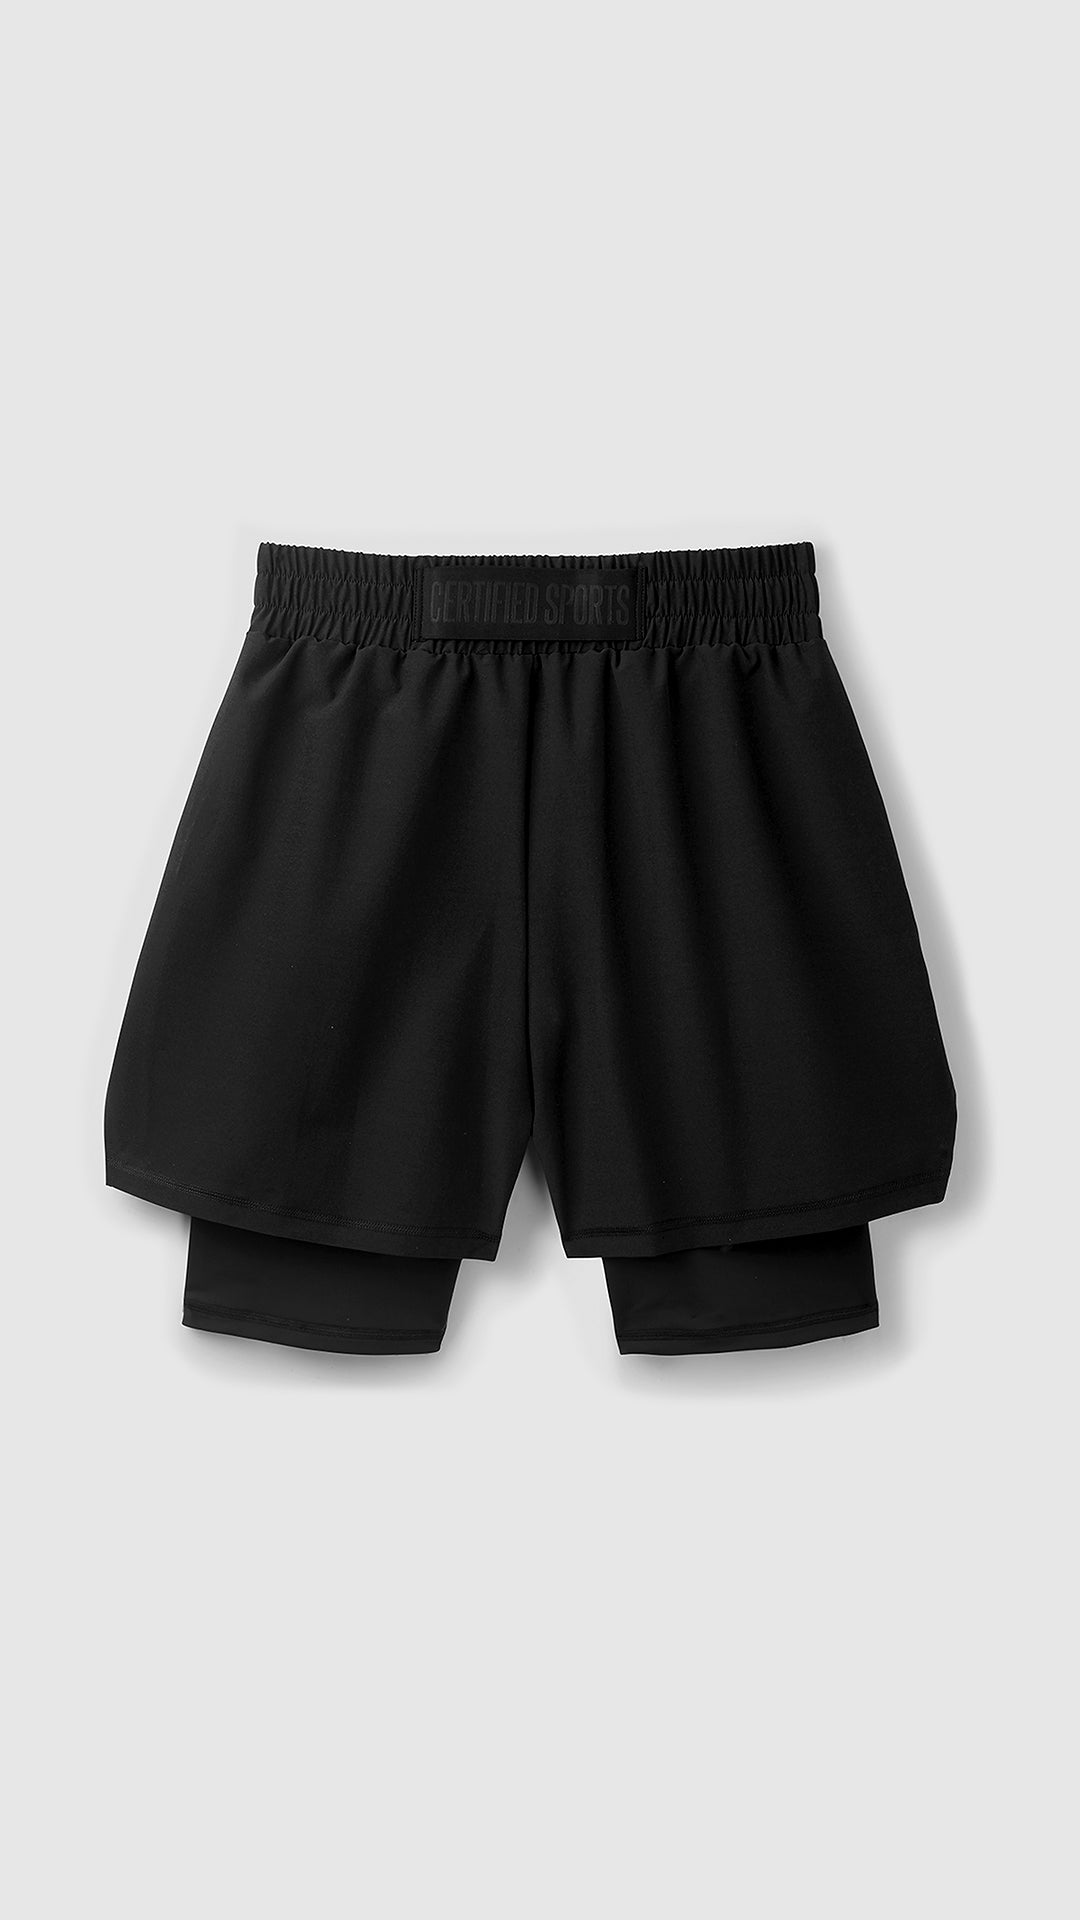 THE 2IN1 SHORTS